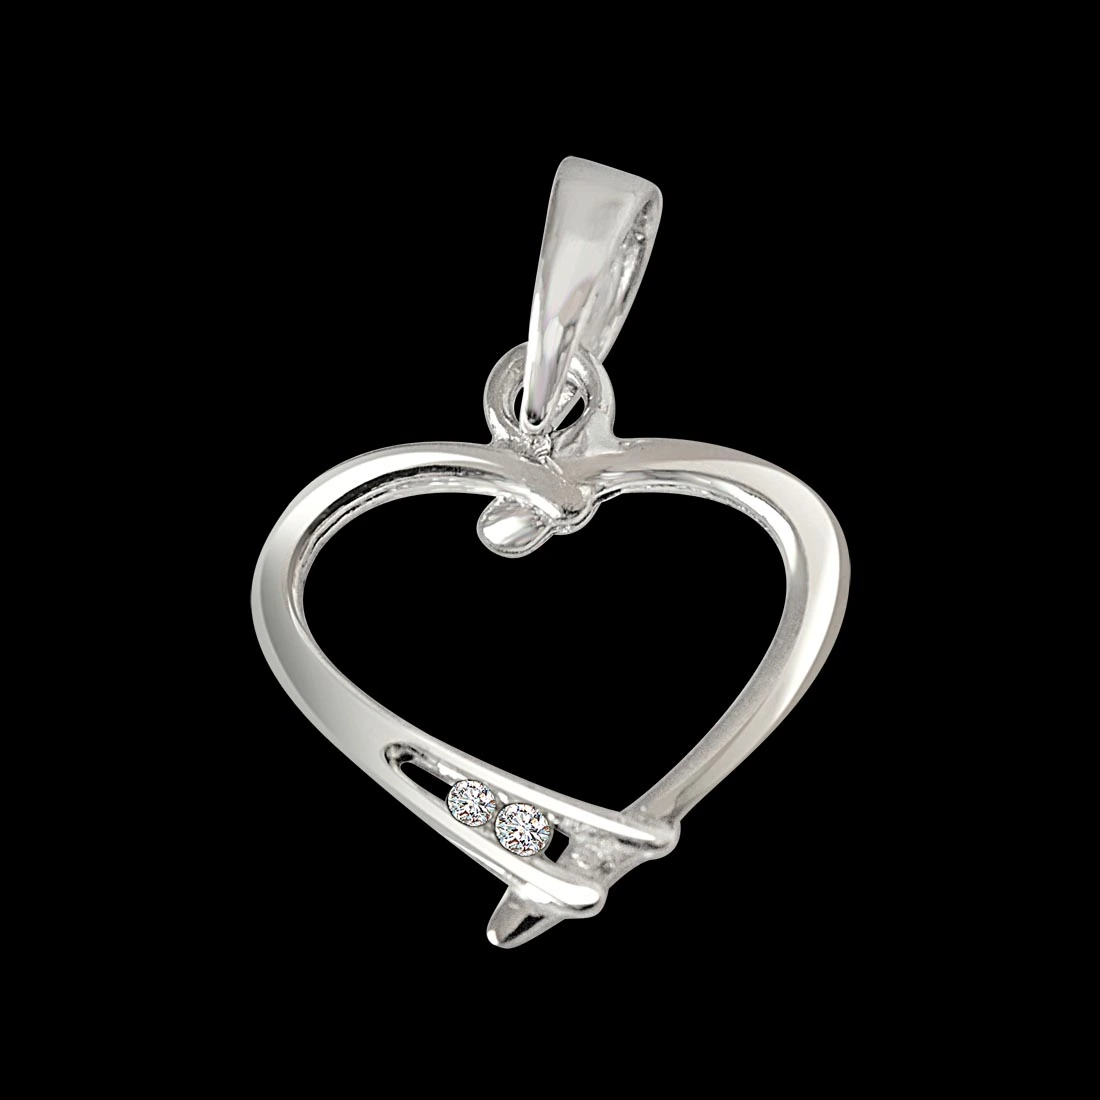 Ribbon Love - Real Diamond & Sterling Silver Pendant with 18 IN Chain (SDP219)